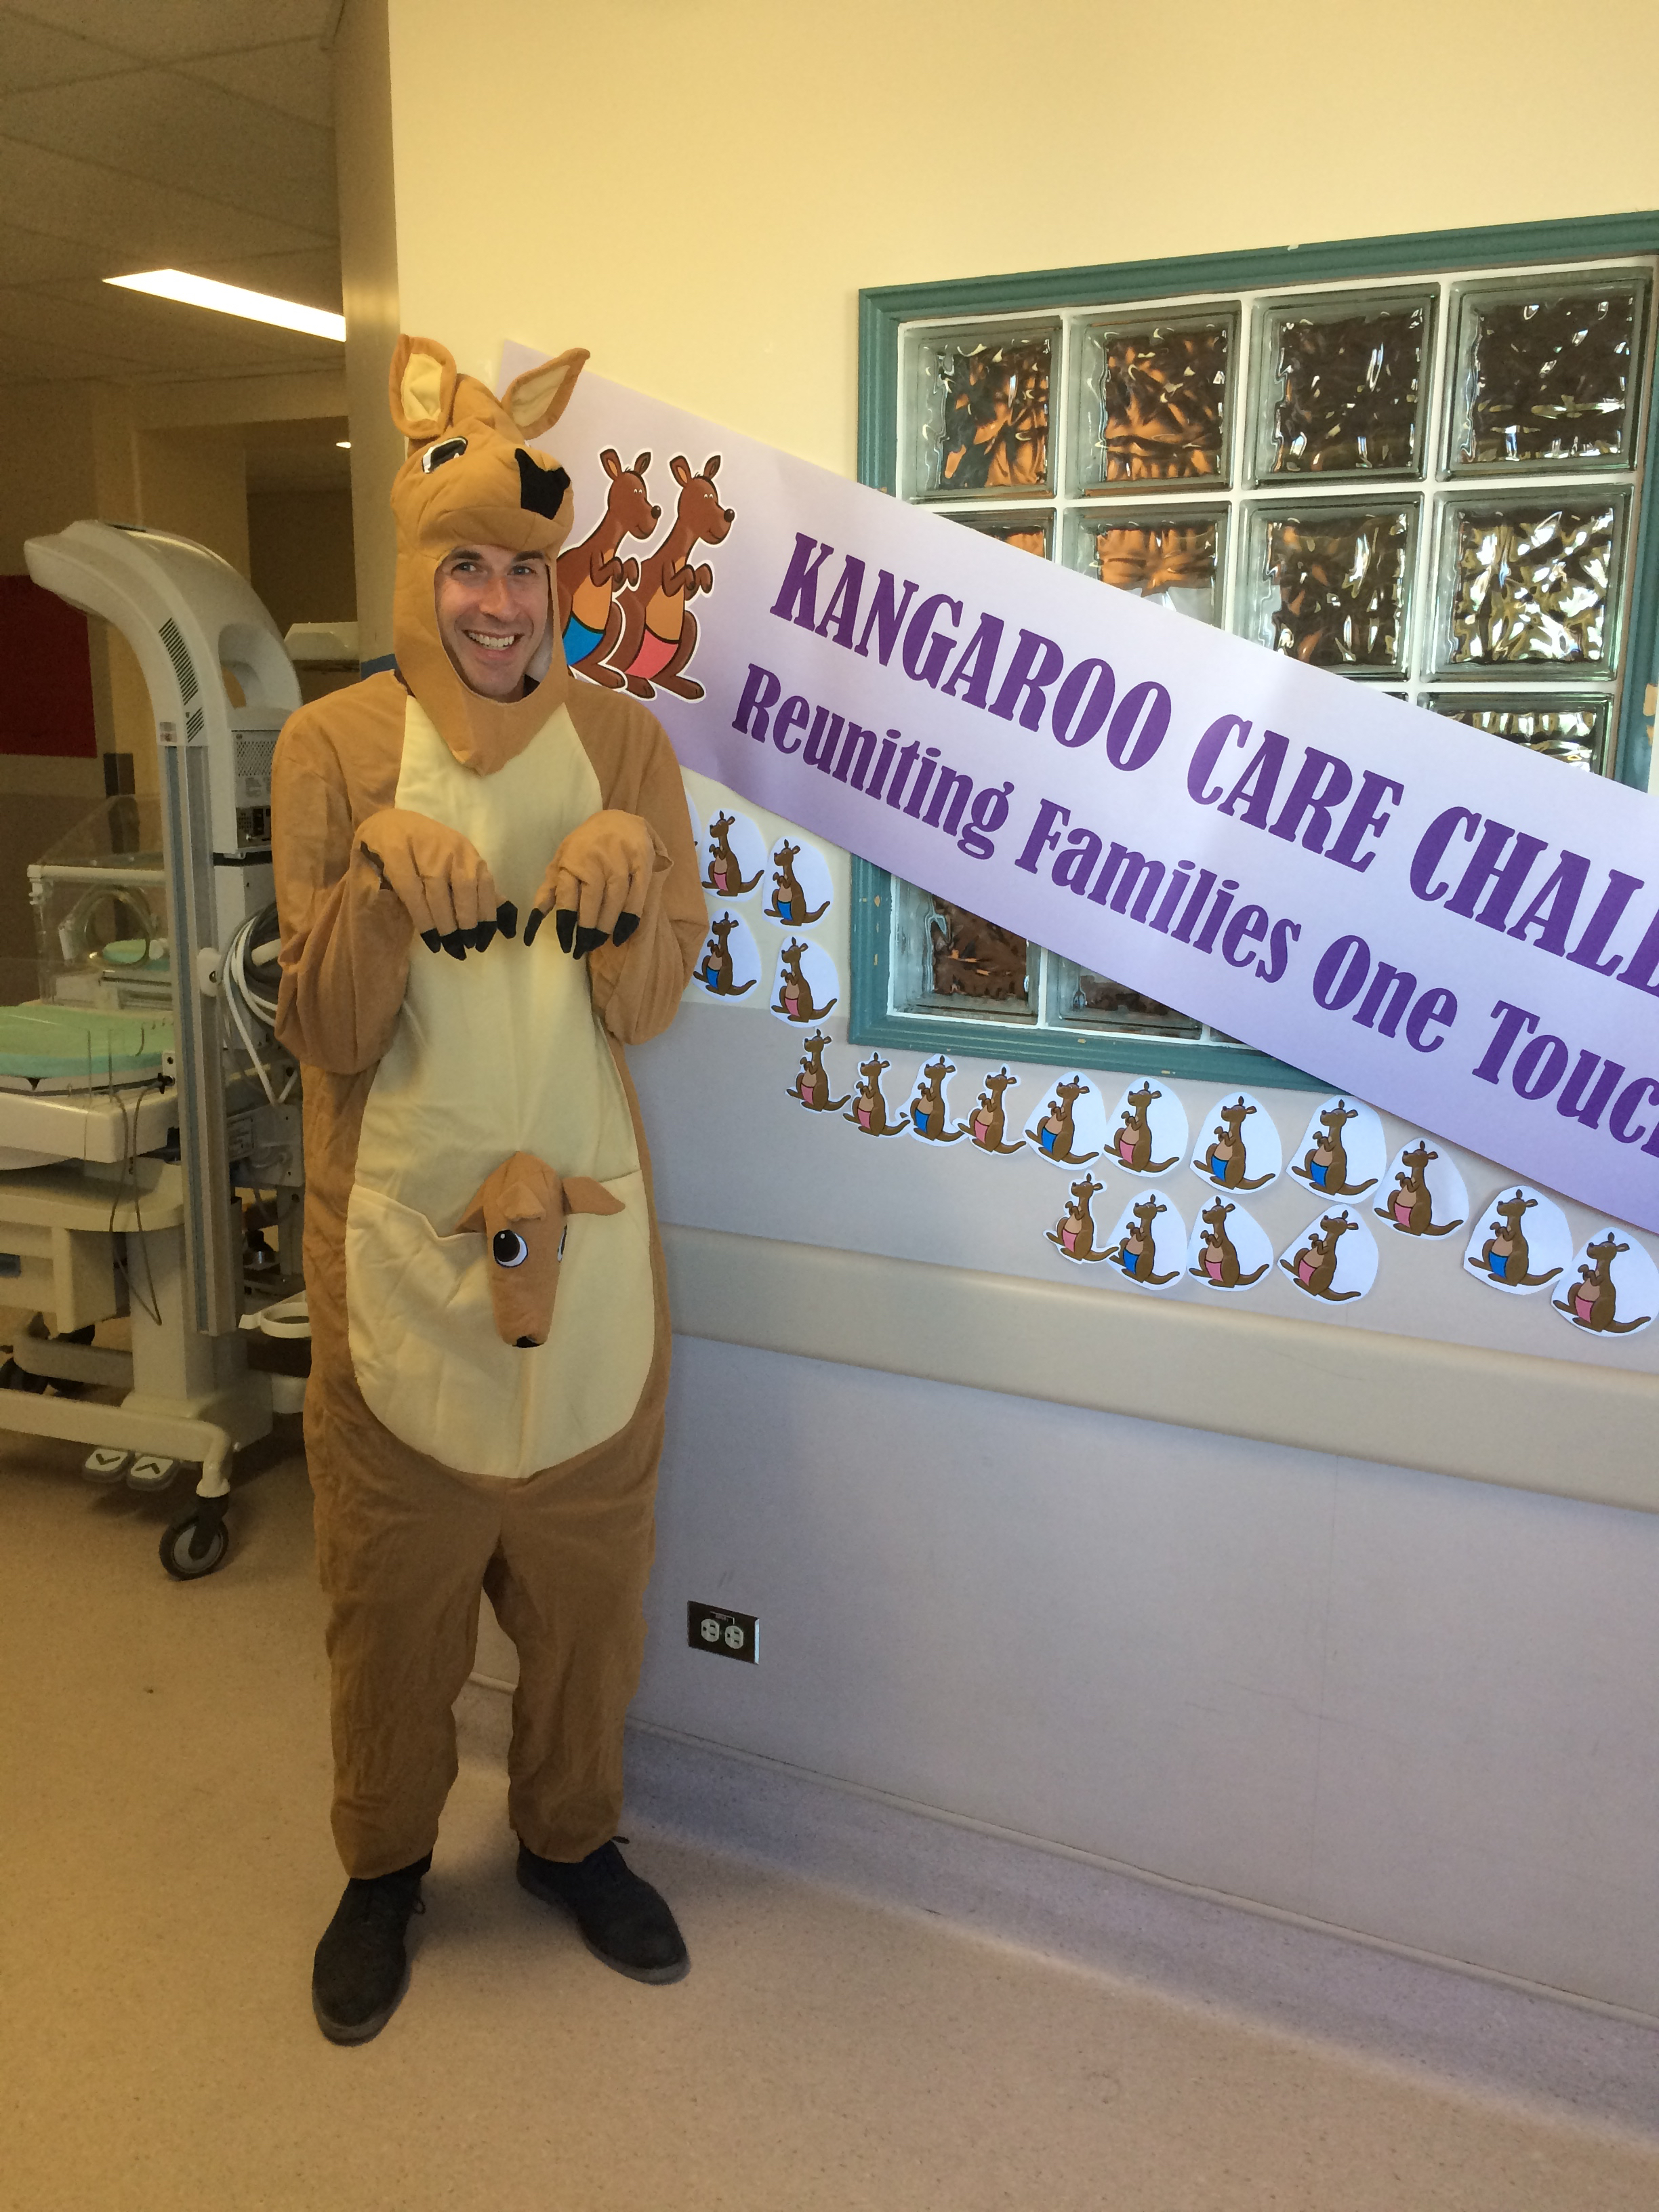 Isn’t it time for a little Kangaroo in your NICU?